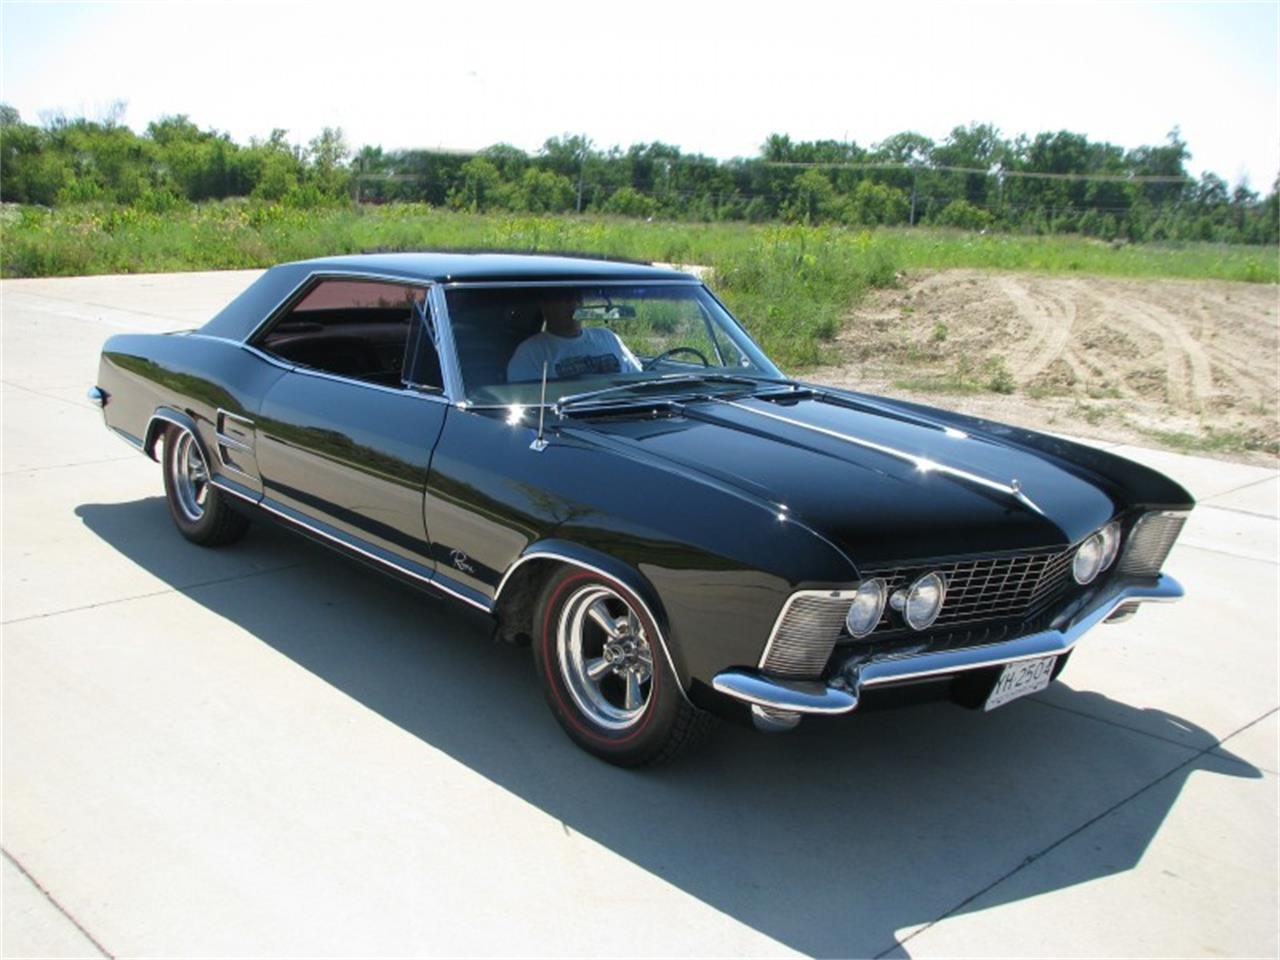 1964 buick riviera for sale classiccars com cc 1006576 1964 buick riviera for sale